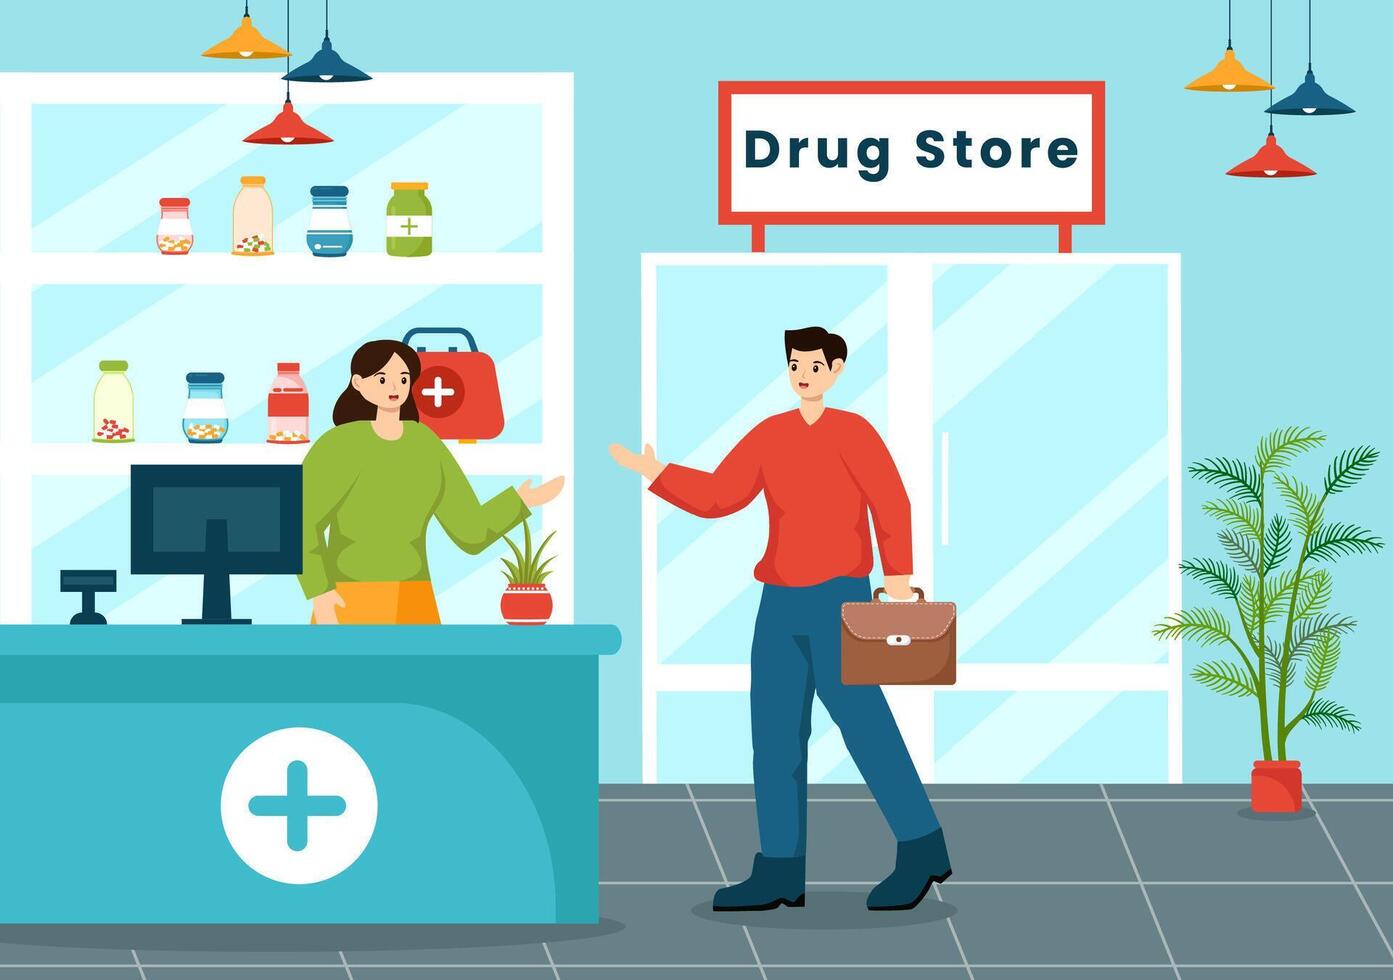 Drug Store Vector Illustration with Shop for the Sale of Drugs, a Pharmacist, Medicine, Capsules and Bottle in Healthcare Flat Cartoon Background